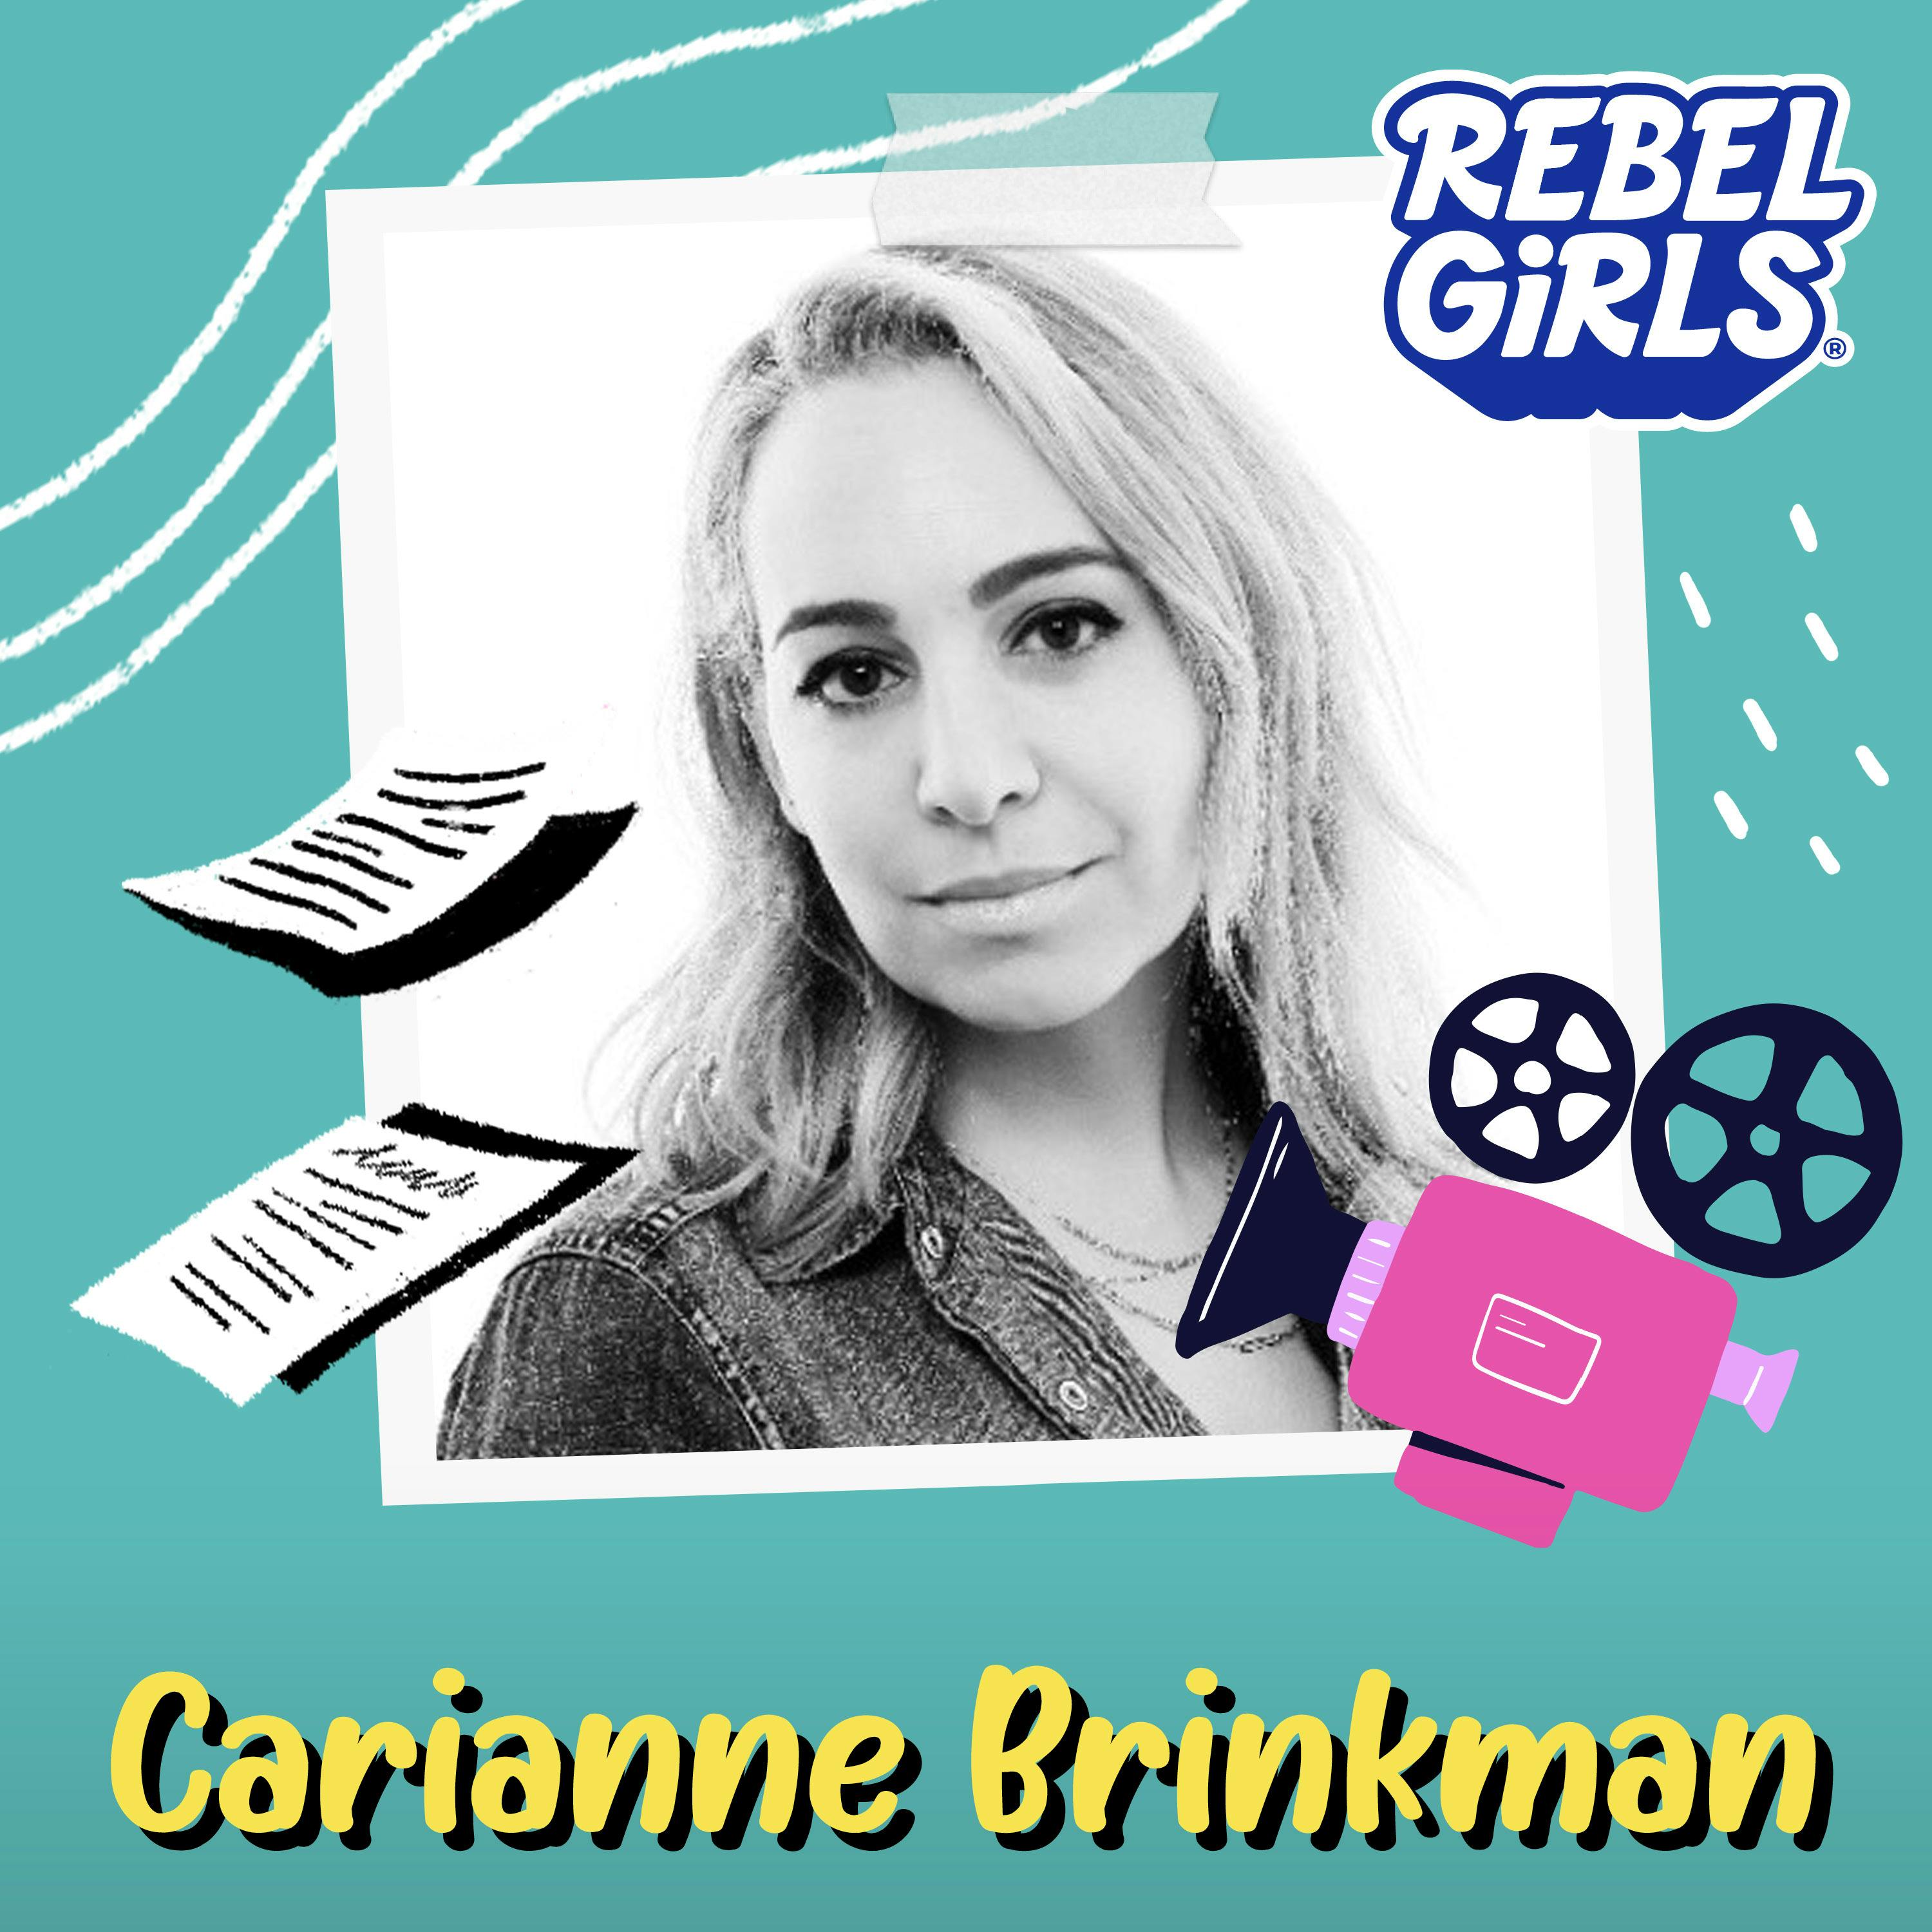 Get to Know Carianne Brinkman